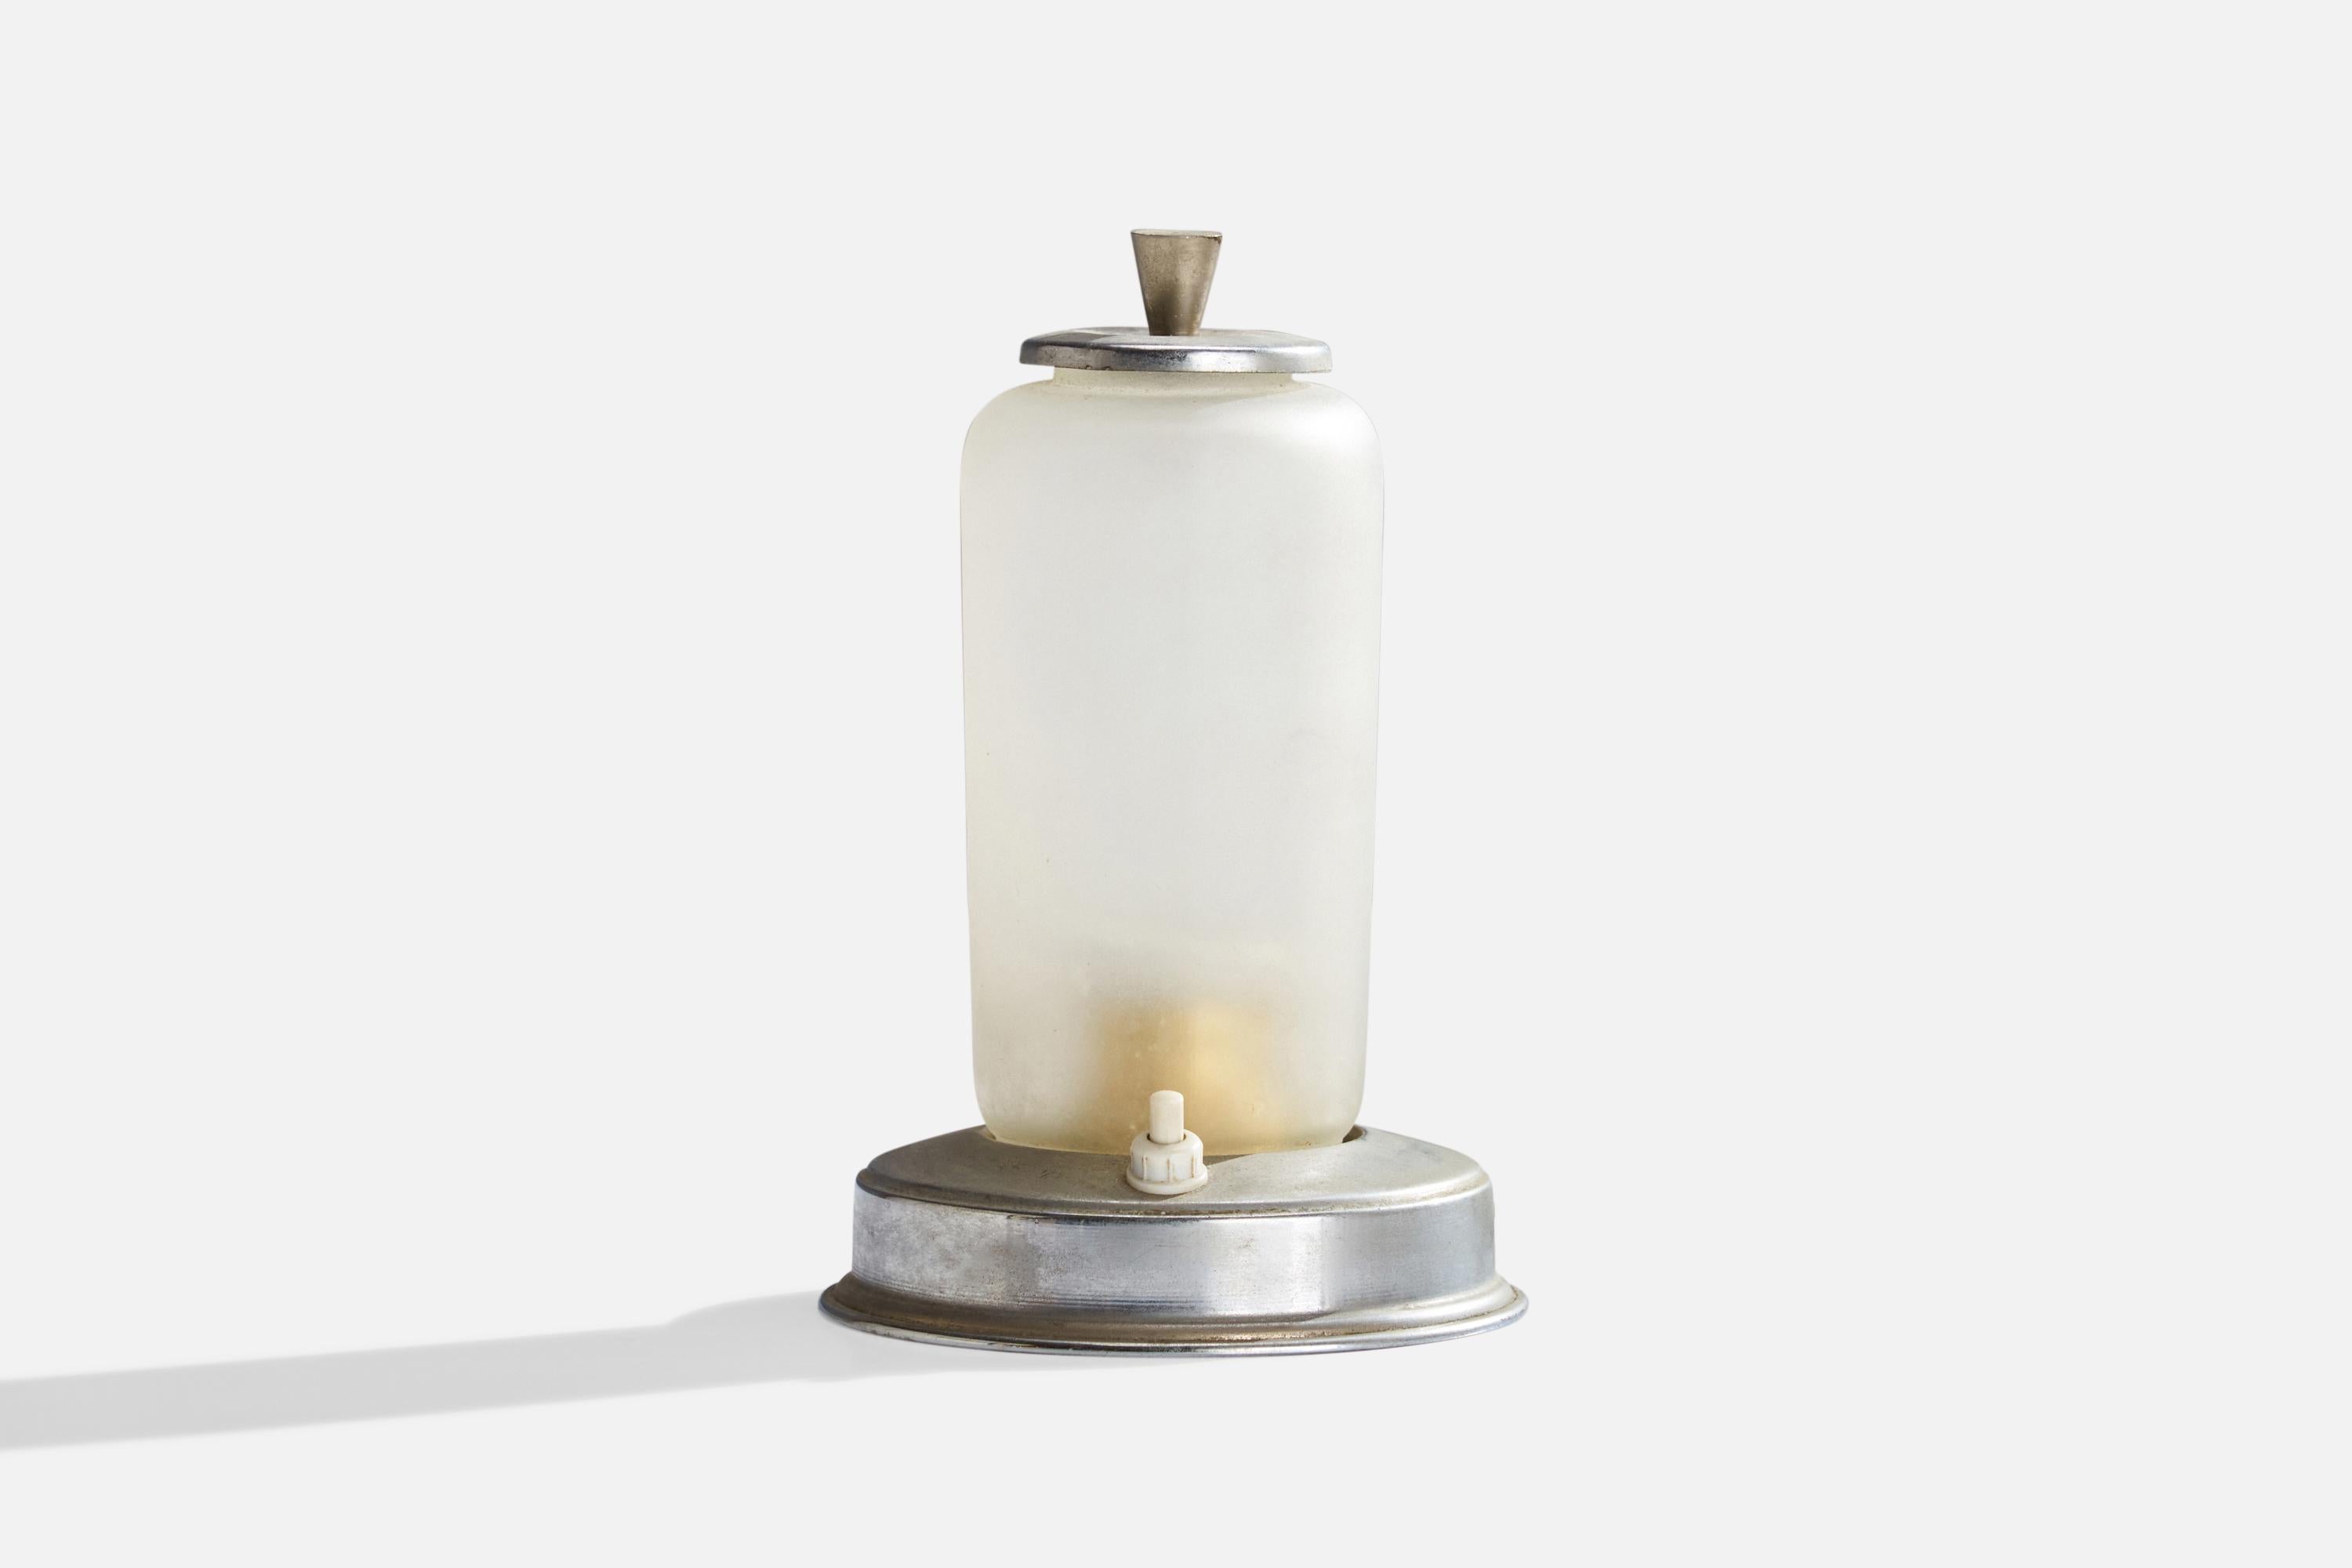 A opaline glass and nickel table lamp designed and produced in Italy, c. 1930s.

Overall Dimensions (inches): 7.25”  H x 4.75” D
Stated dimensions include shade.
Bulb Specifications: E-26 Bulb
Number of Sockets: 1
All lighting will be converted for